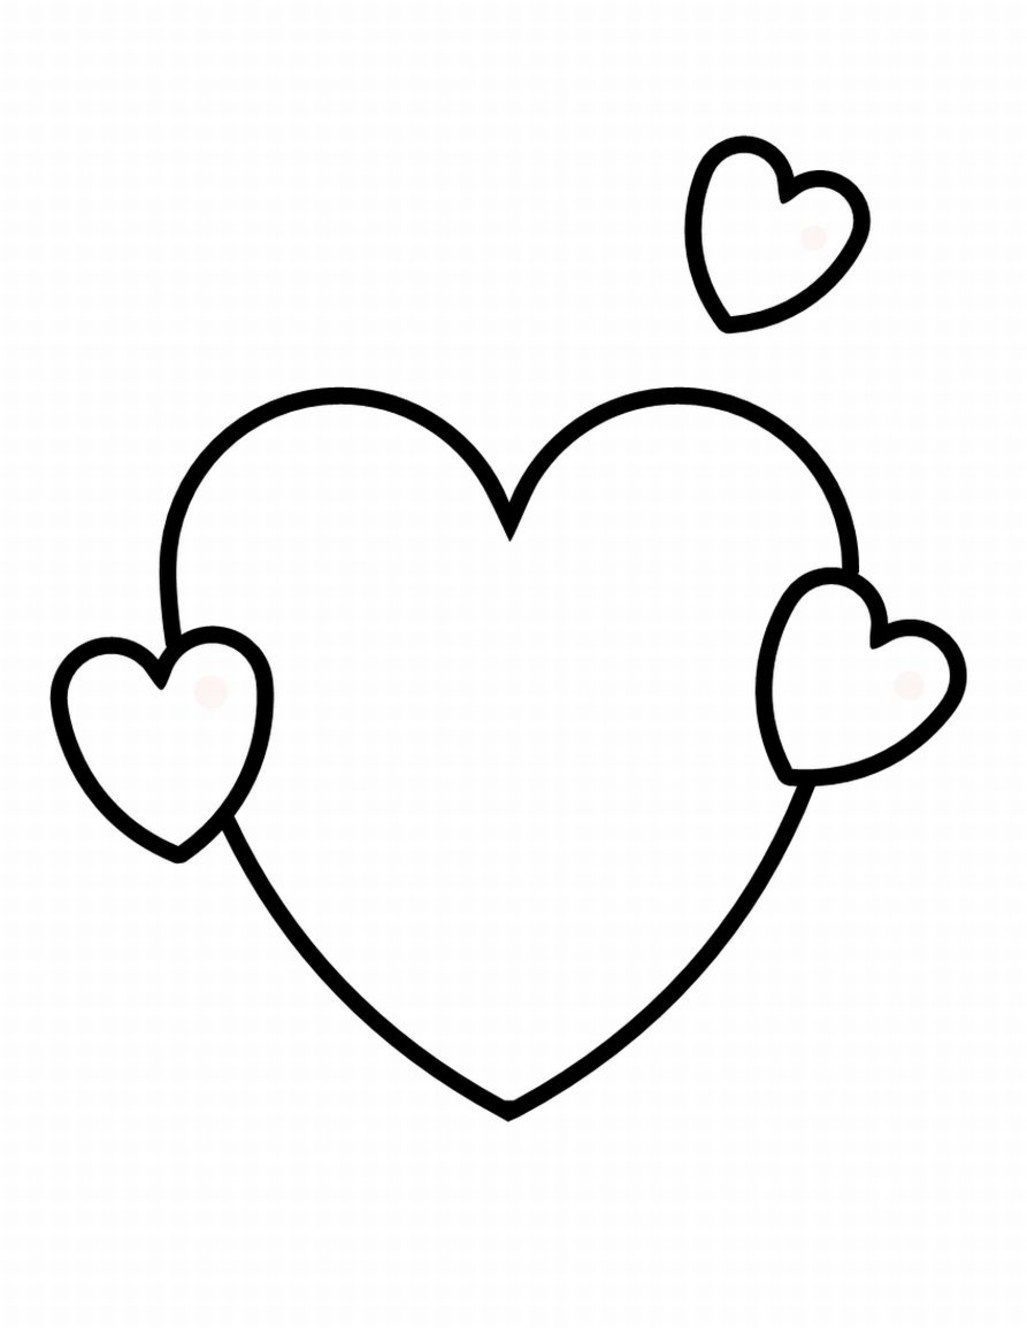 Free Hearts With Wings Coloring Pages, Download Free Clip Art, Free - Free Printables Of Hearts